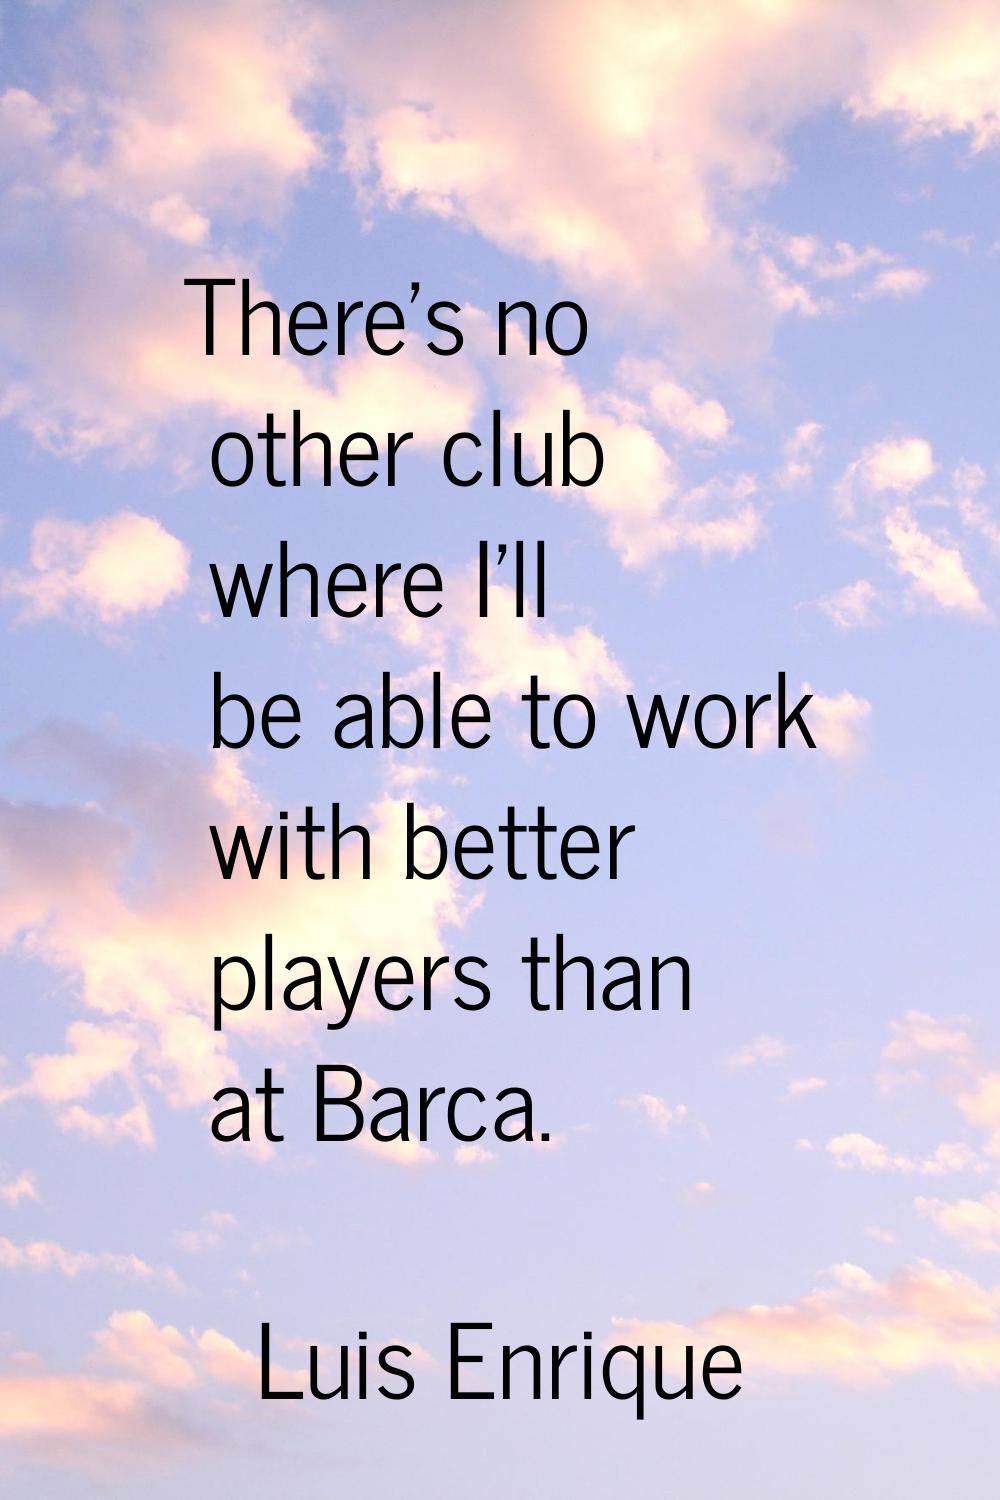 There's no other club where I'll be able to work with better players than at Barca.